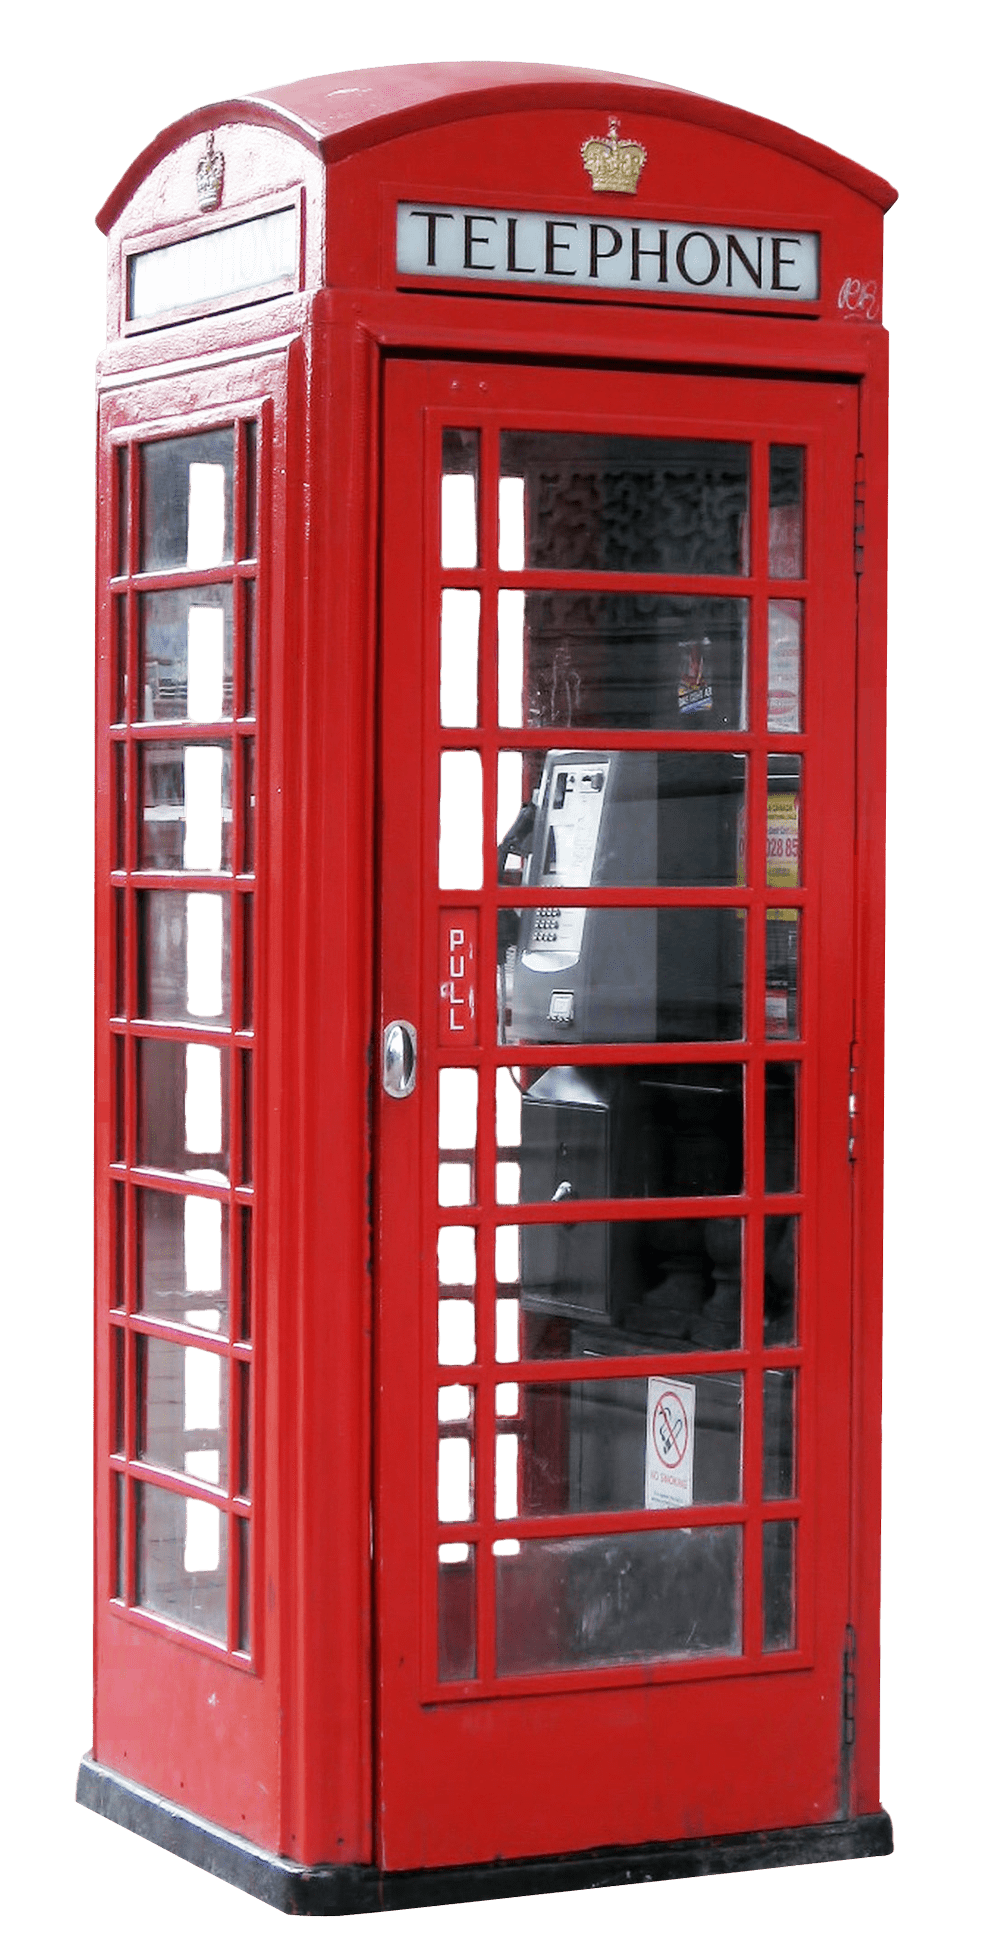 London Telephone Booth PNG HD Image